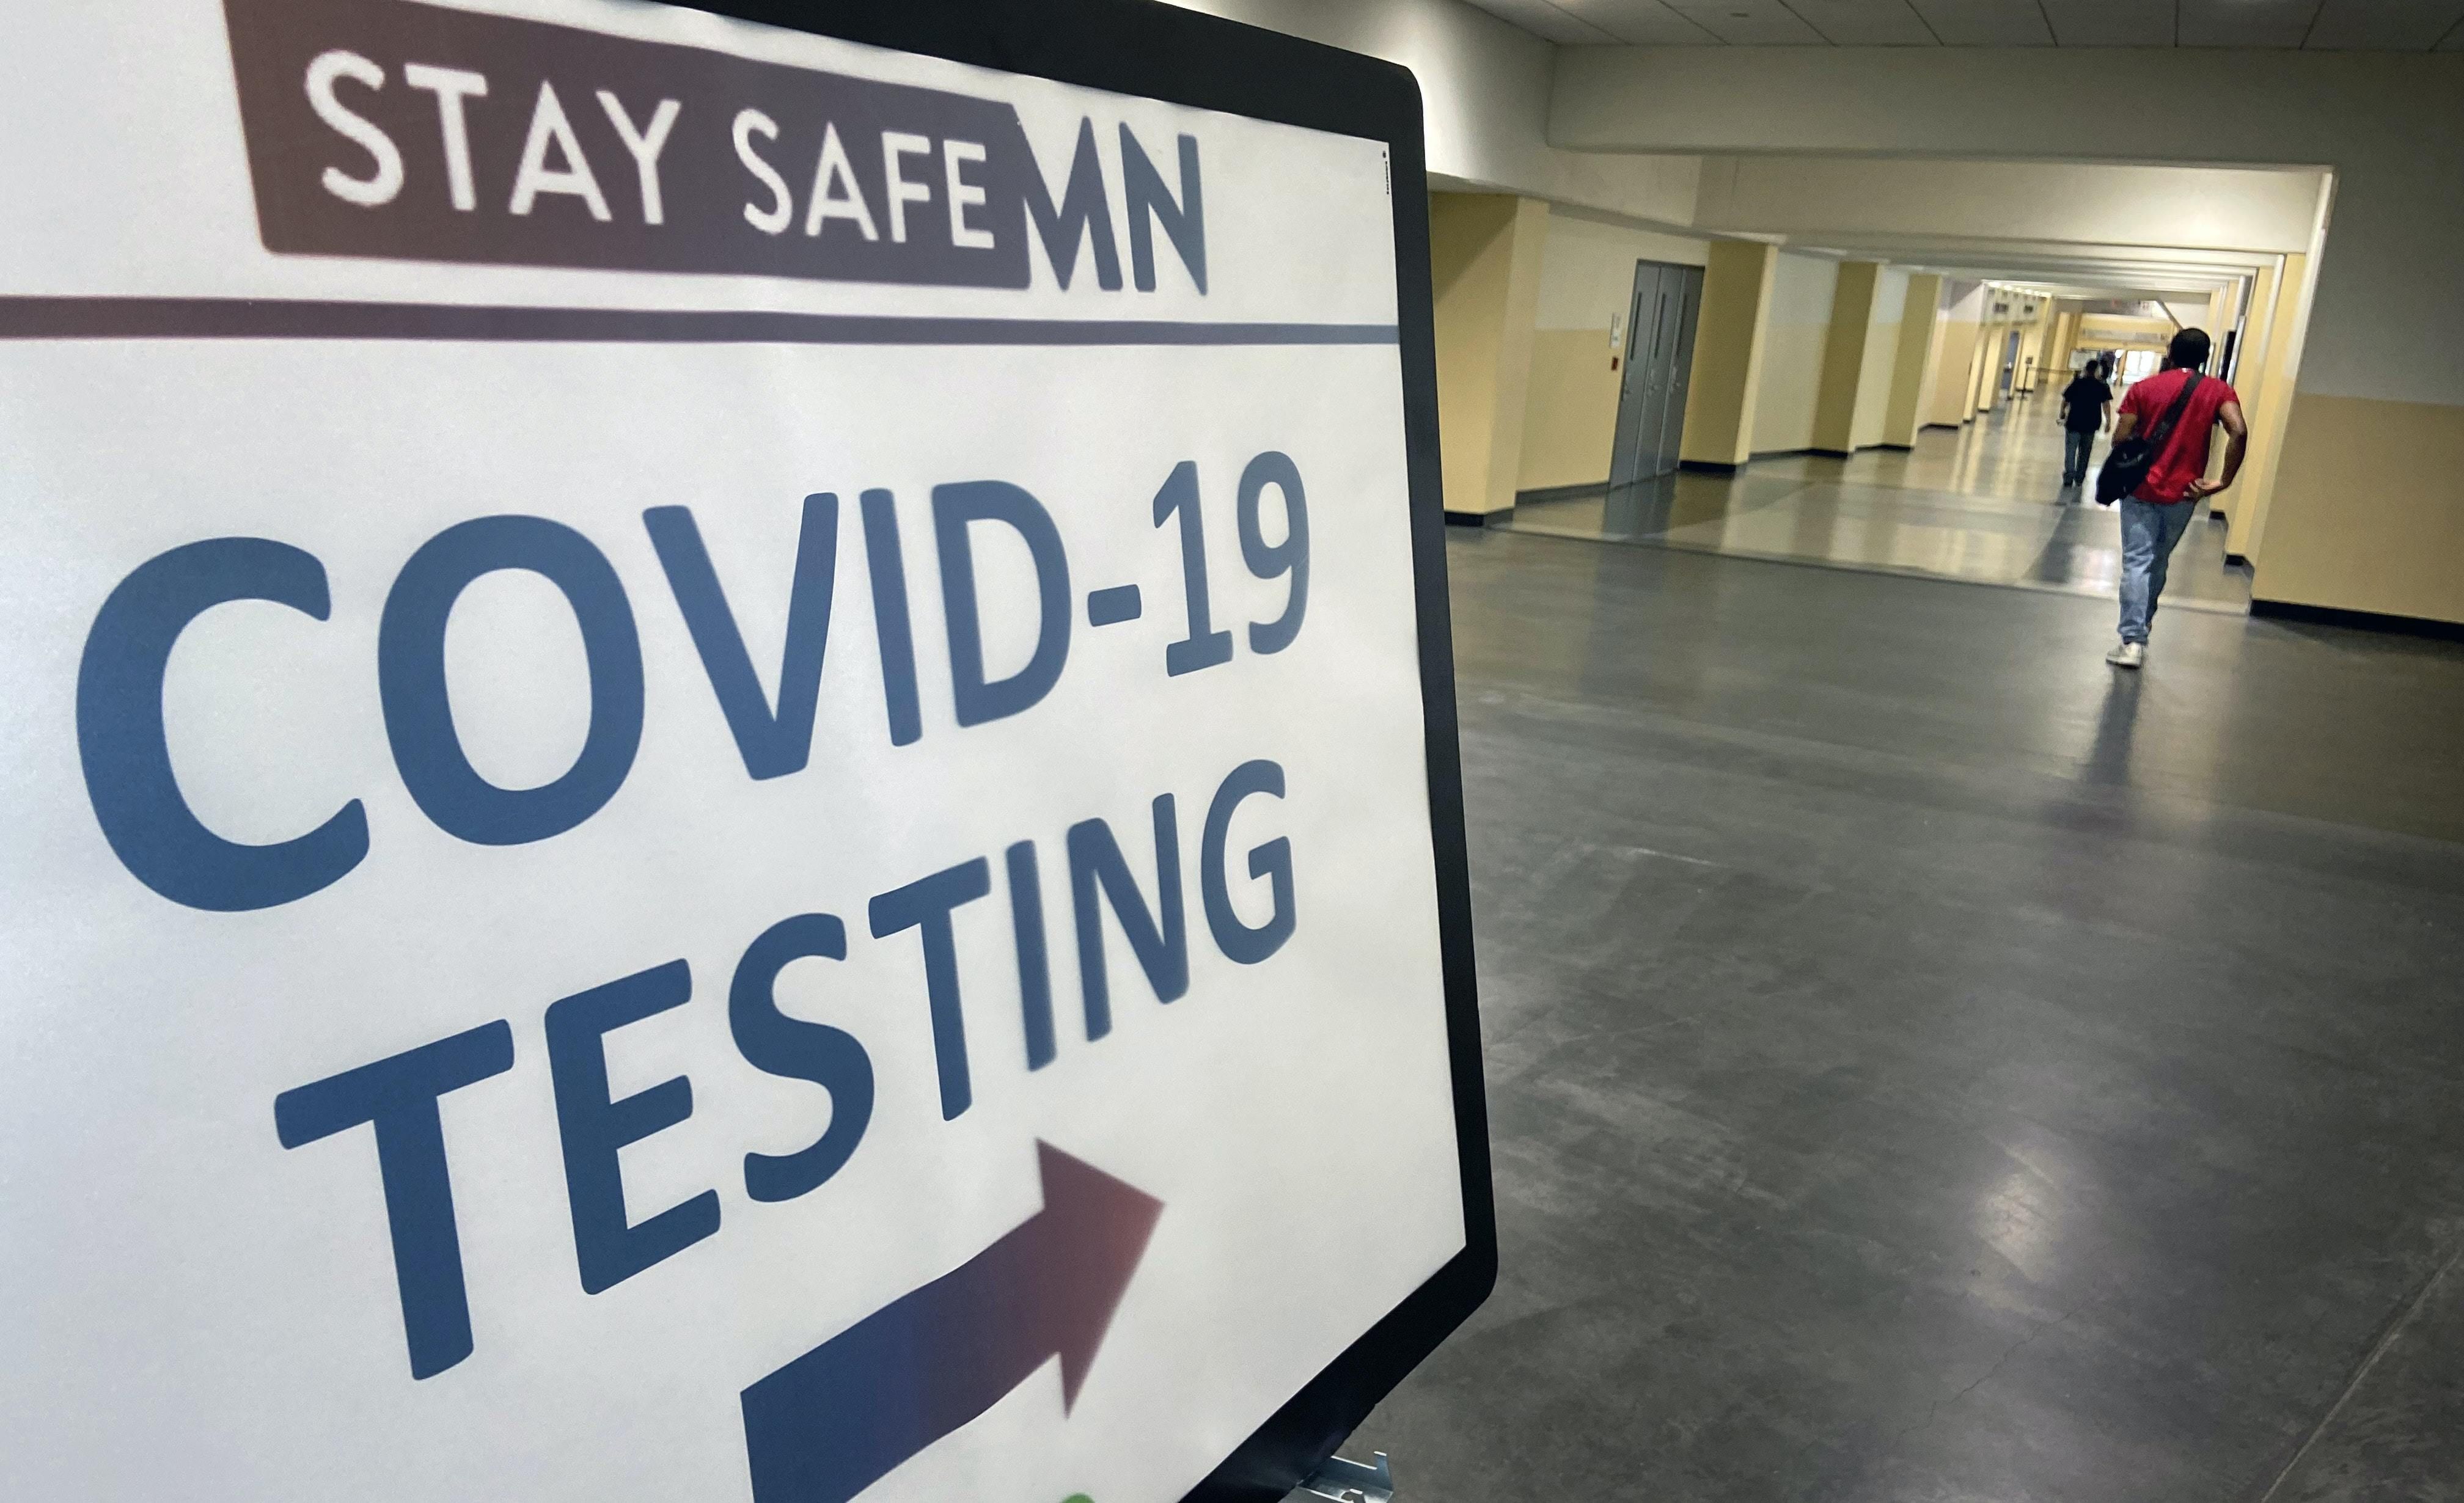 New COVID-19 Testing Site Opens Today in St. Paul